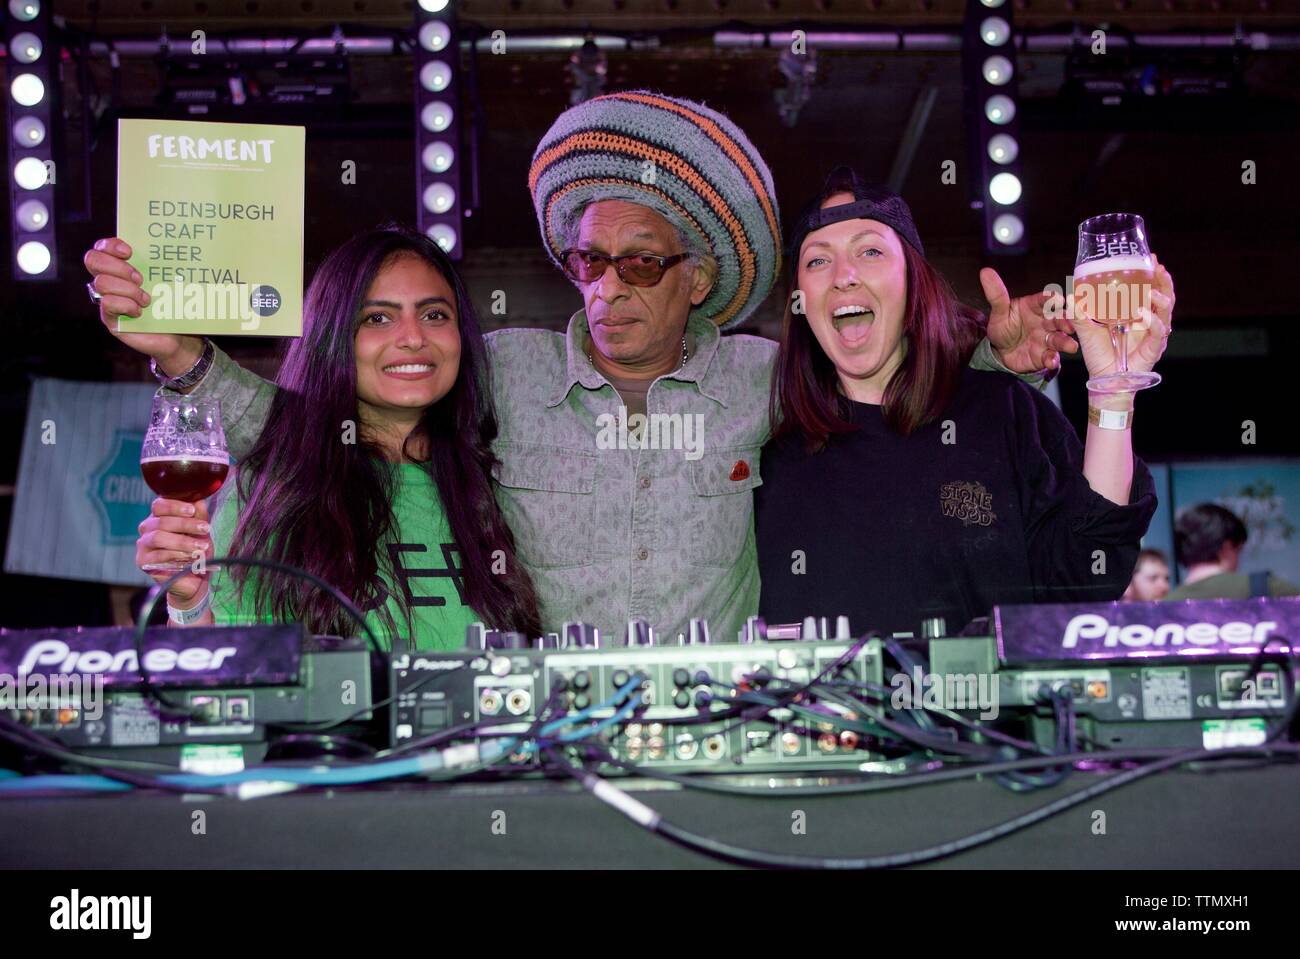 Edinburgh, UK, 25th May 2018: Don Letts, film director, DJ and musician, performing at Edinburgh Craft Beer Festival. Credit: Terry Murden, Alamy Stock Photo